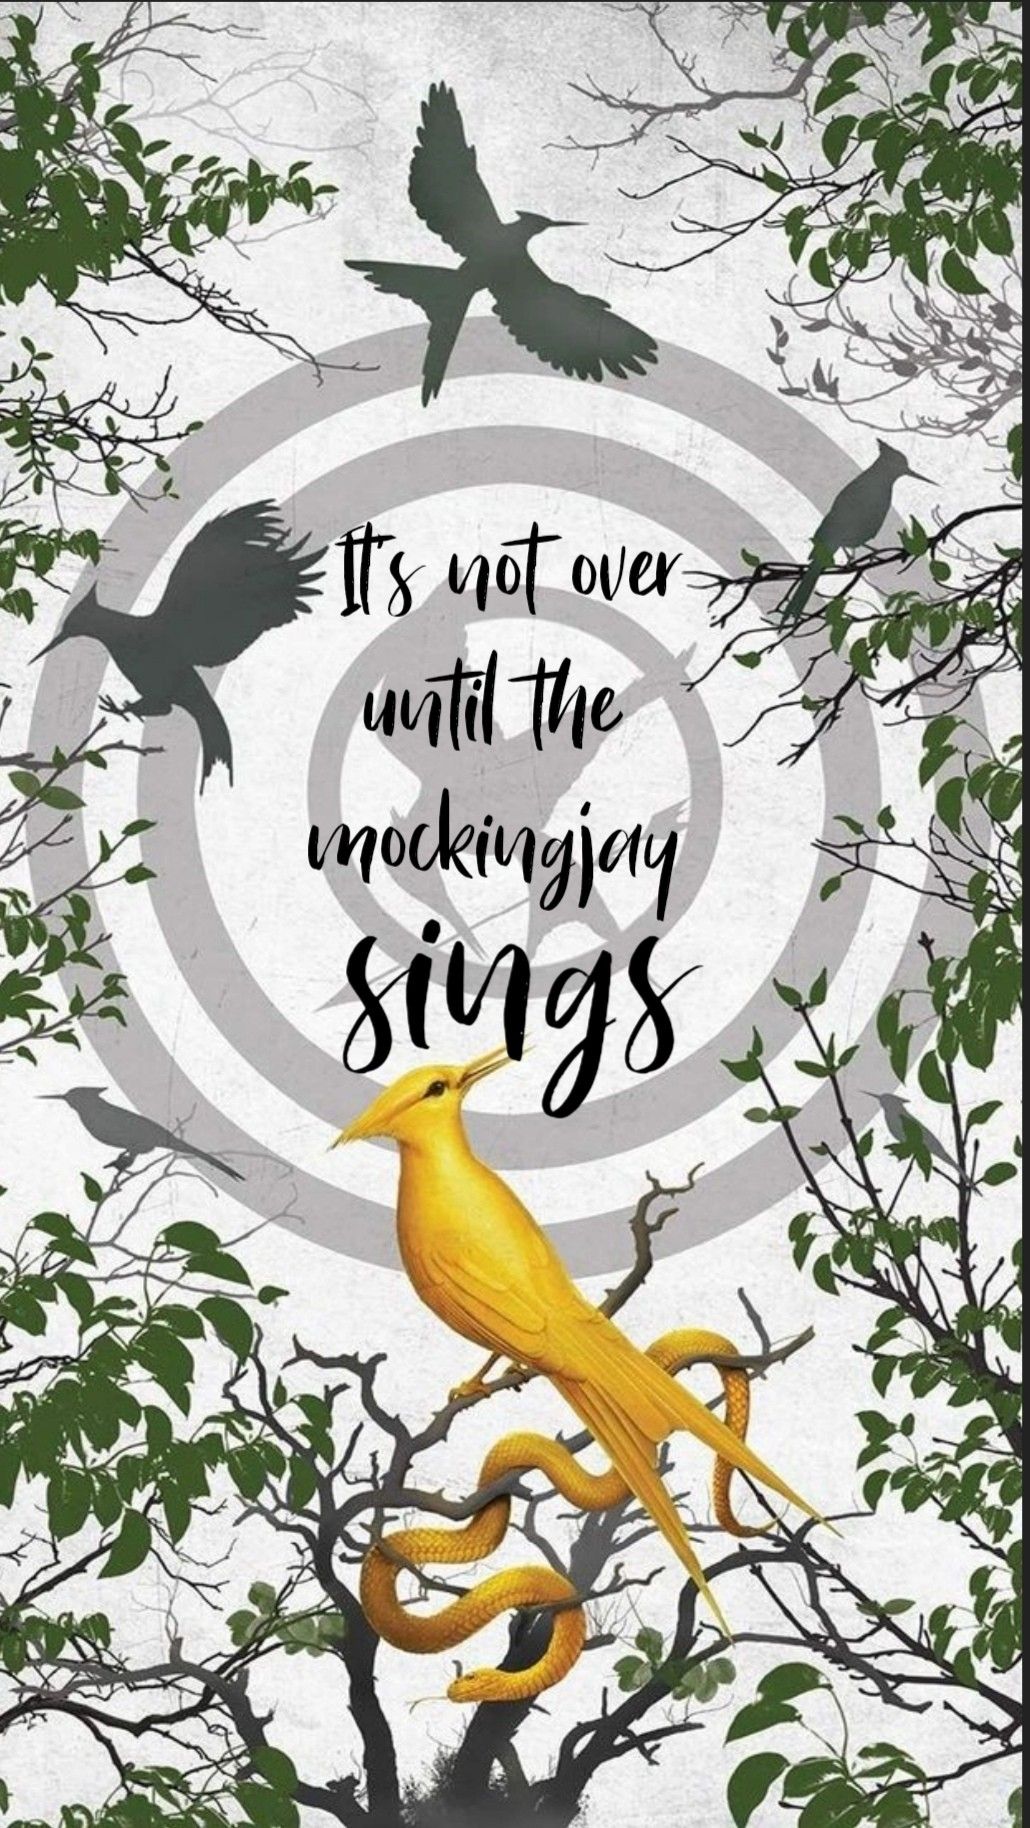 The ballad of songbirds and snakes quote wallpaper. Hunger games wallpaper, Hunger games fandom, Hunger games fan art